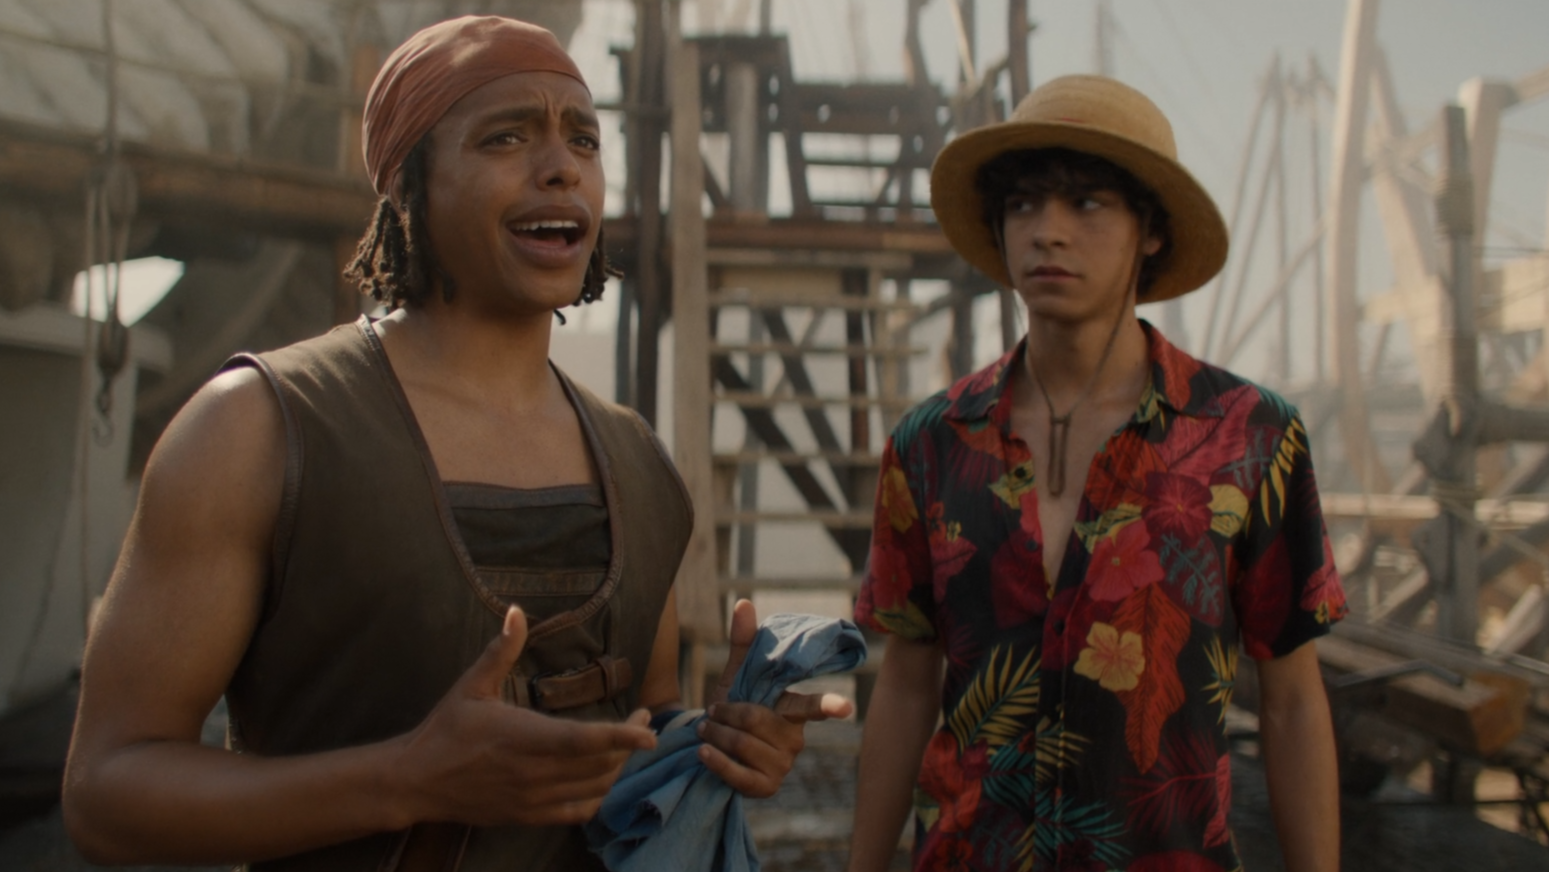 One Piece Live Action Episode 3 Tell No Tales Luffy Talks With Usopp At The Shipyard